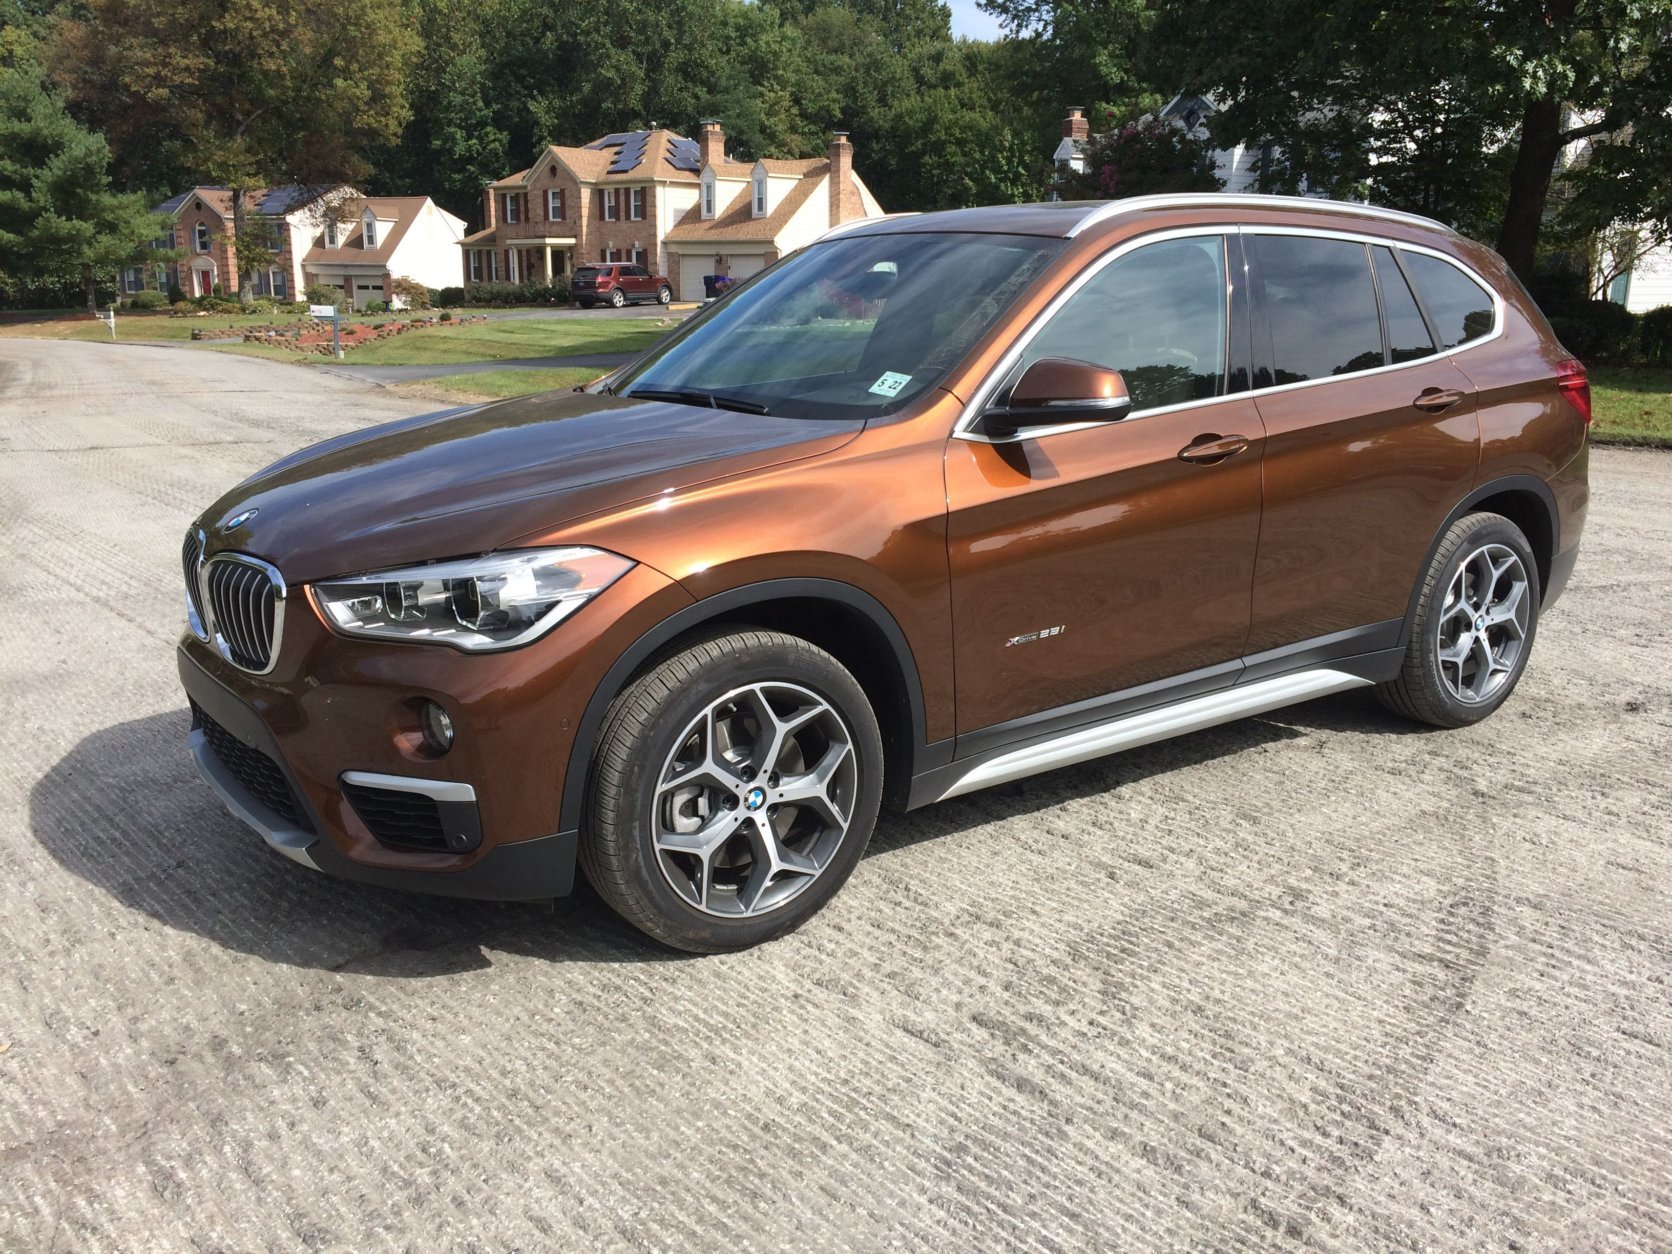 The X1 with AWD has a starting price of $36,000. With the added options, it becomes a small luxury crossover with a price hike. Parris' tester came in at $46,300. (WTOP/Mike Parris) 